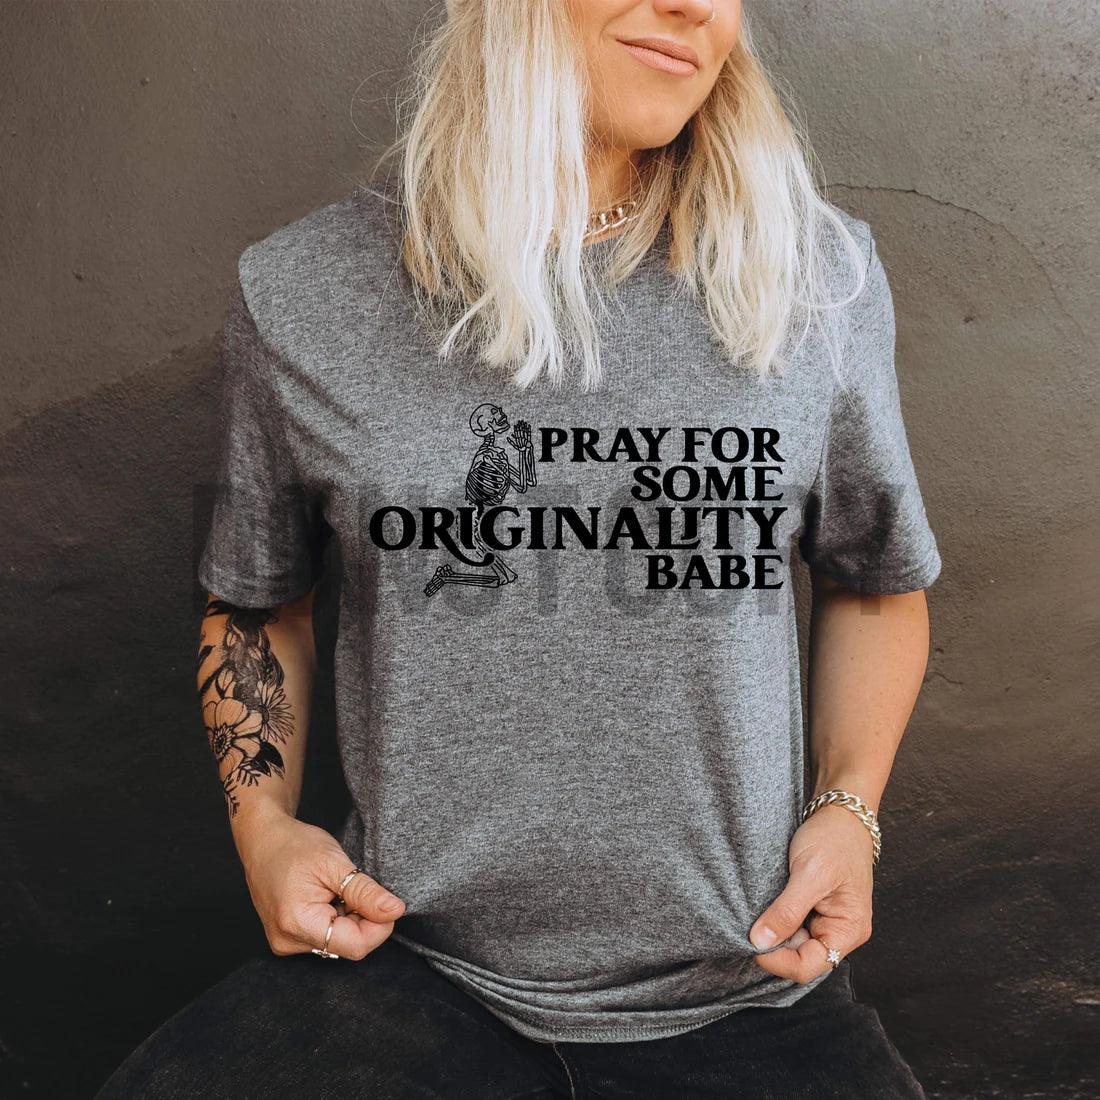 Pray for some originality babe -*Ollie & Co. Exclusive* Shirt